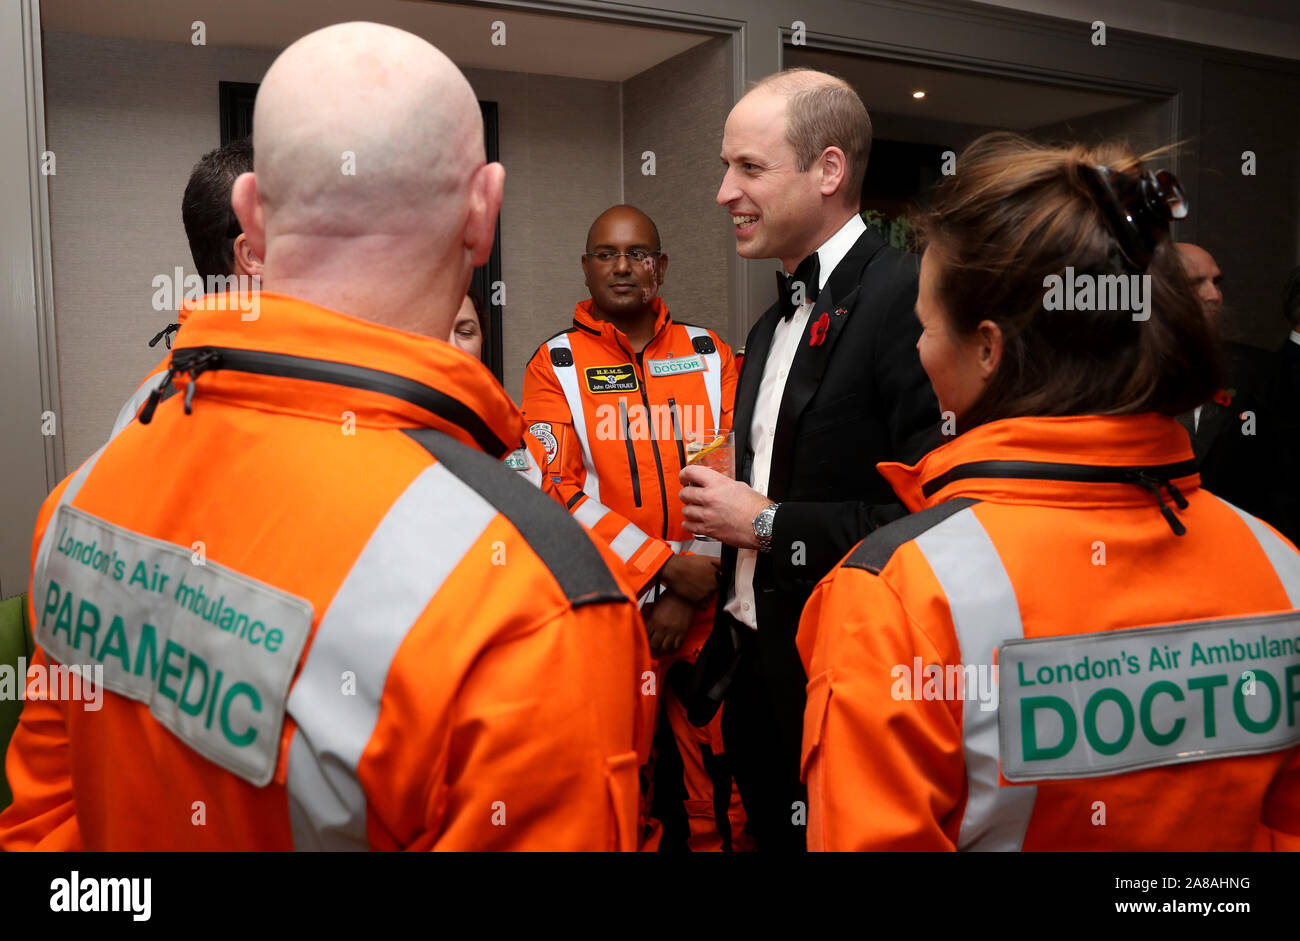 The Duke of Cambridge speaks with (left to right) Paramedic Steve Jones, Anaesthetic Consultant at Guys and St Thomas Hospitals Doctor John Chatterjee and Royal London Hospital Consultant in emergency medicine Doctor Flora Bird as he attends the London's Air Ambulance Charity gala at Rosewood London in Holborn. Stock Photo